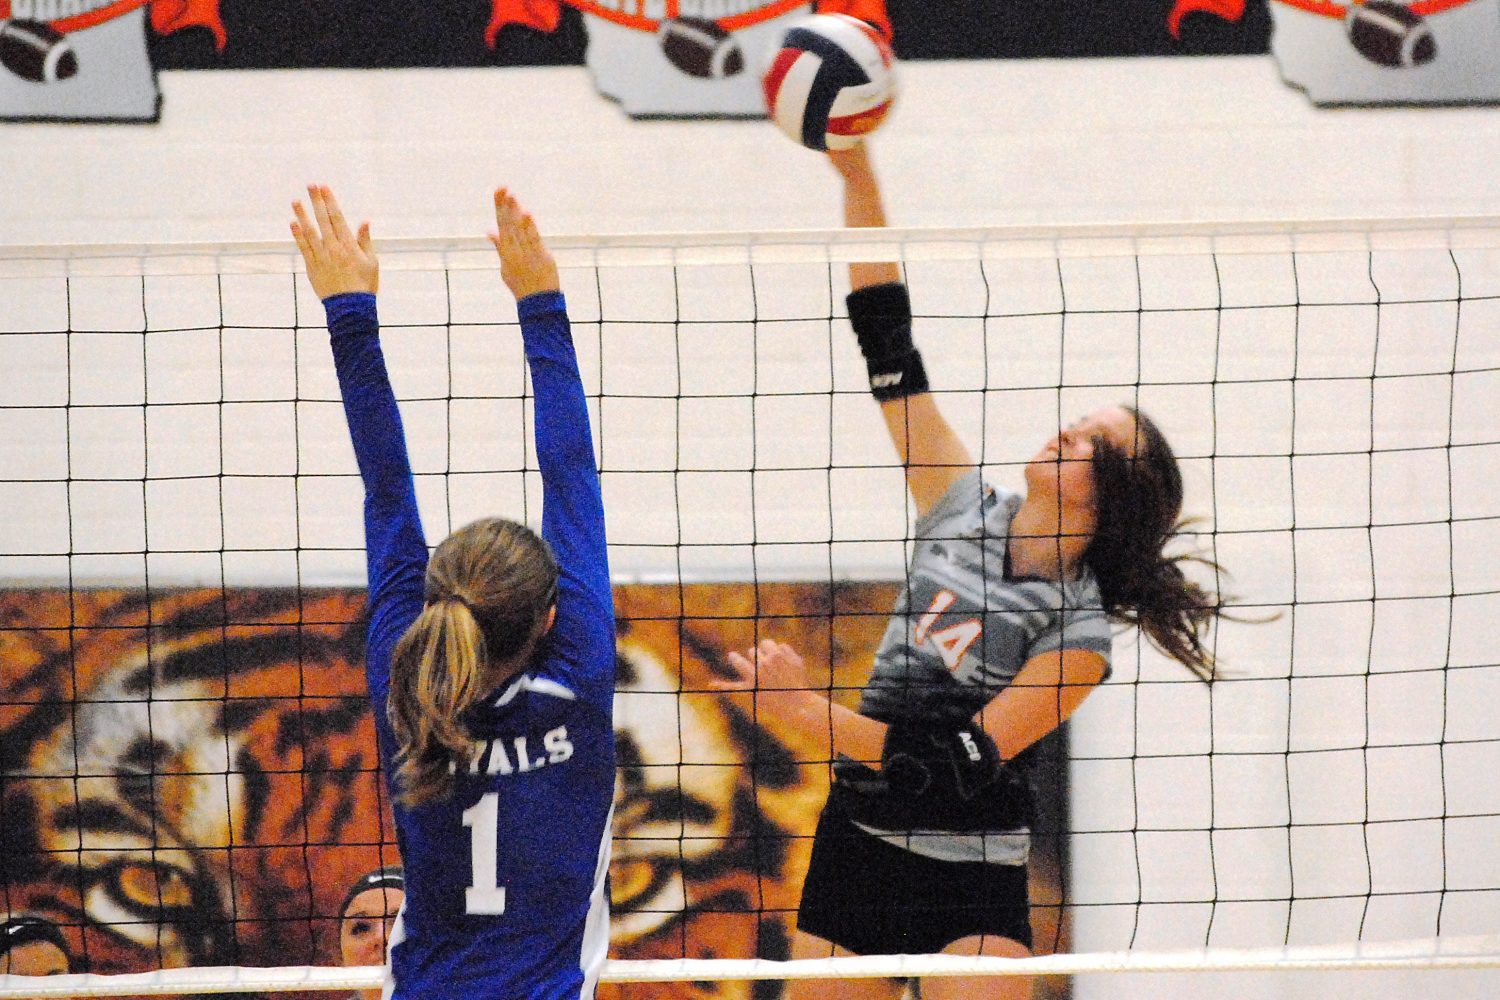 Stratford’s Mazie Nagel puts down a spike during the Tigers’ 3-0 win over Wisconsin Rapids Assumption on Tuesday night at Stratford High School. Nagel and the Tigers are off to a 2-1 start in the Marawood Conference South Division this season.